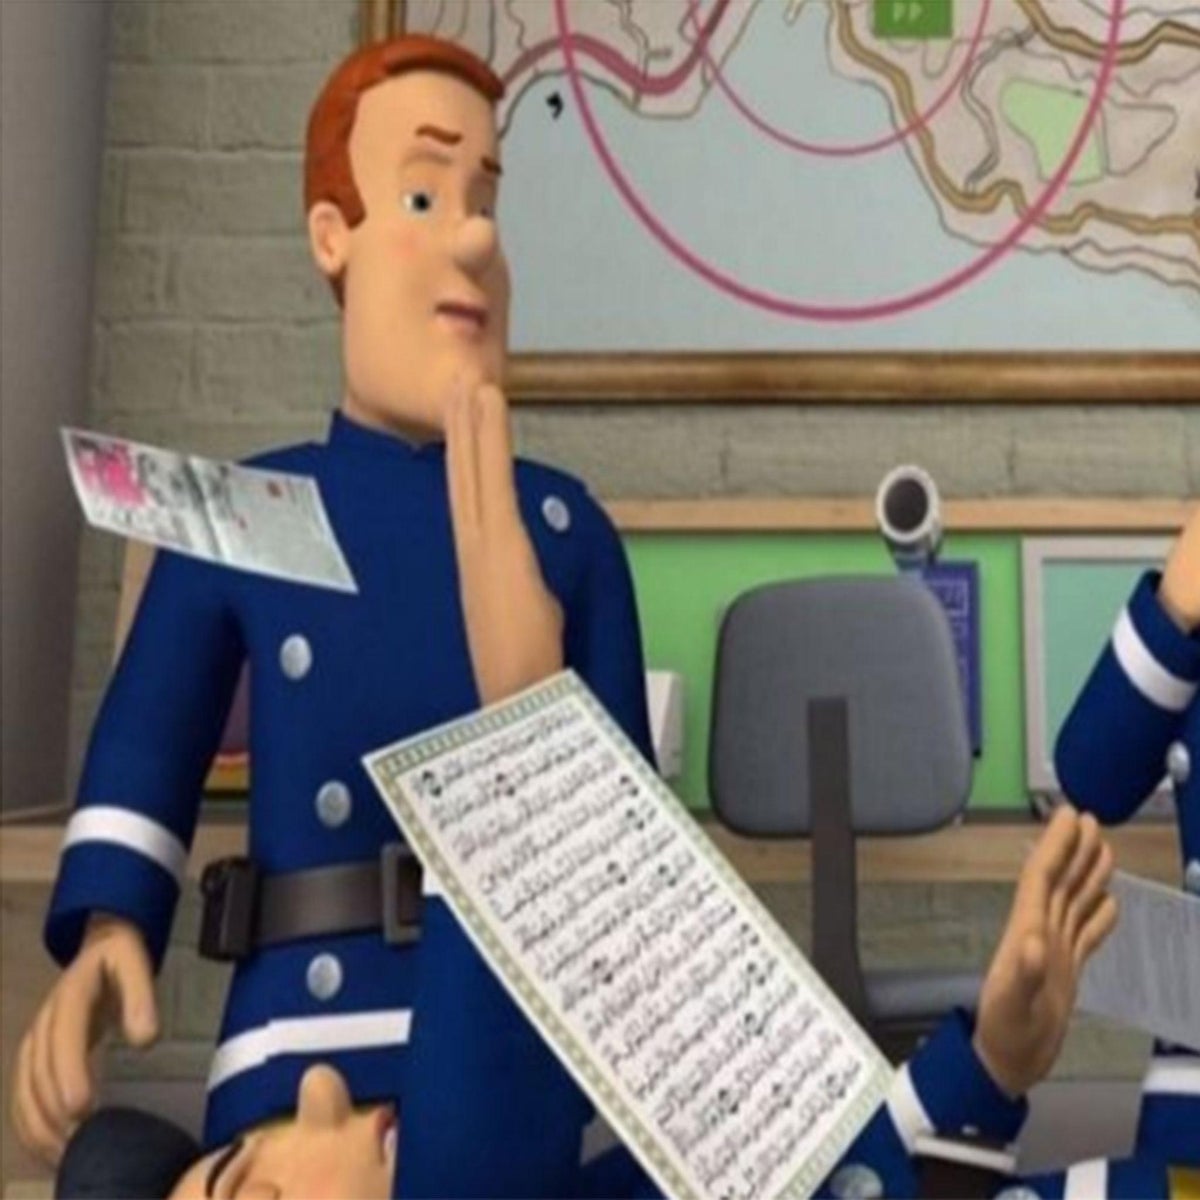 3d Cartoon Sex Raped - Fireman Sam Koran row: How hidden messages and slip-ups can land children's  TV shows in hot water | The Independent | The Independent